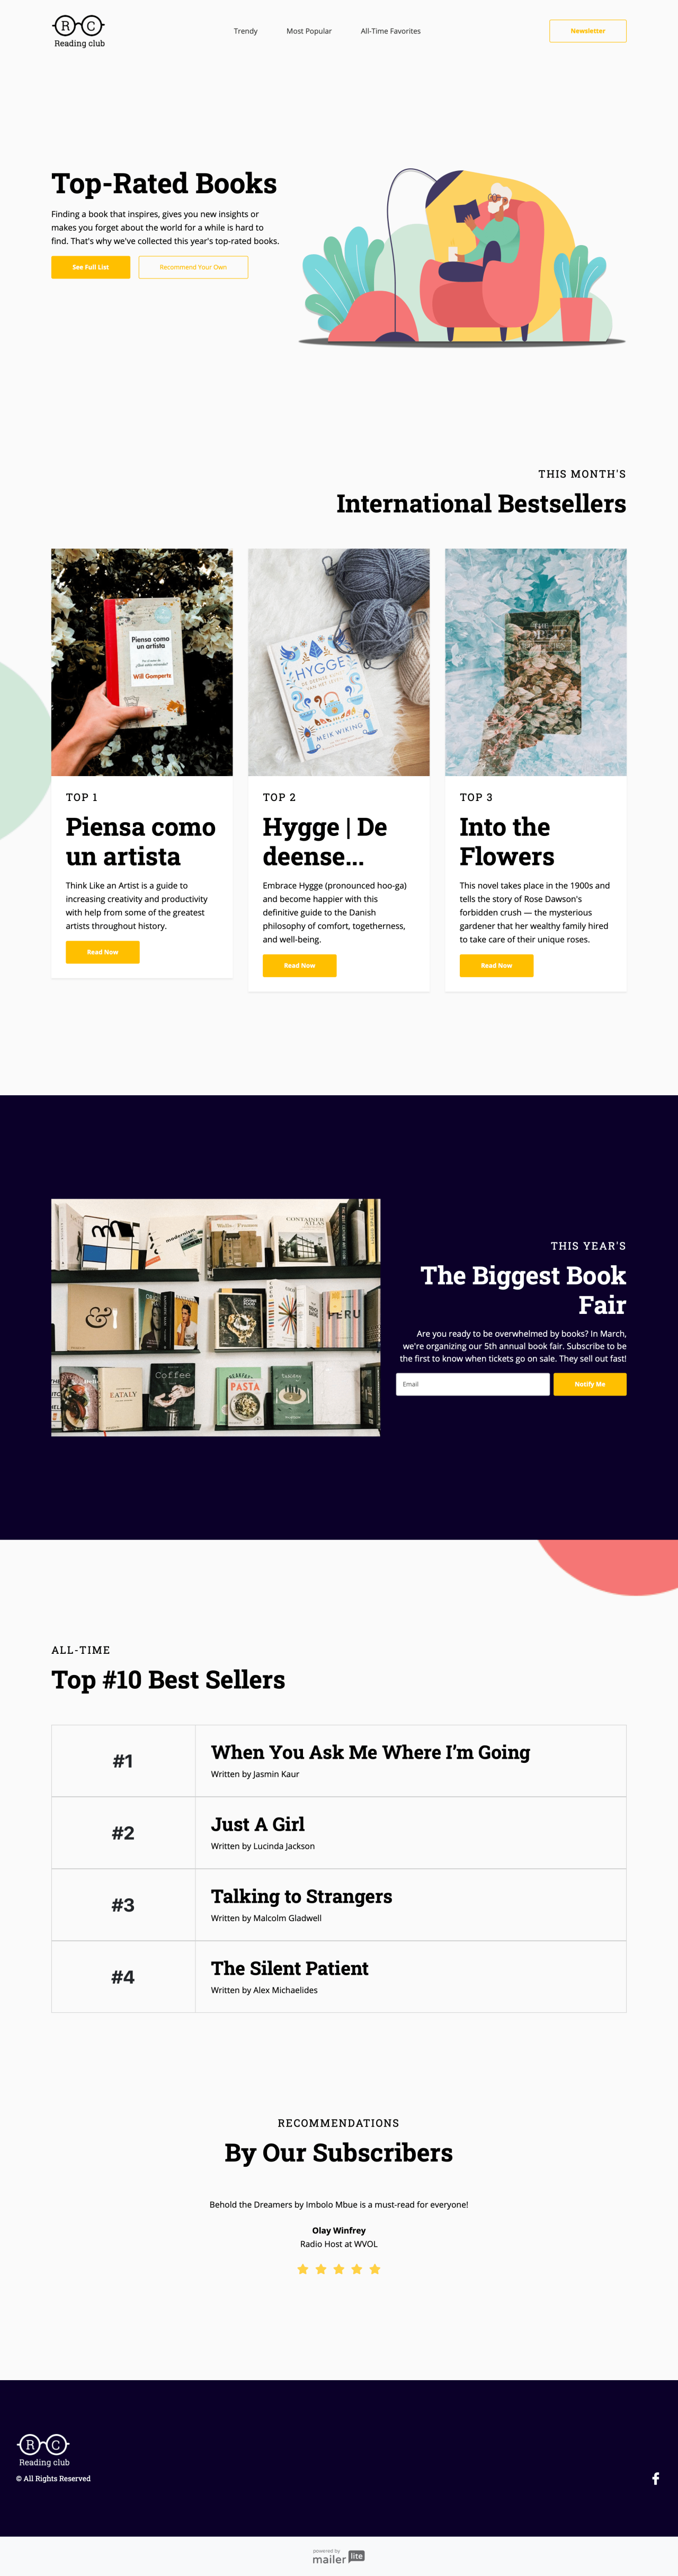 Top books template - Made by MailerLite